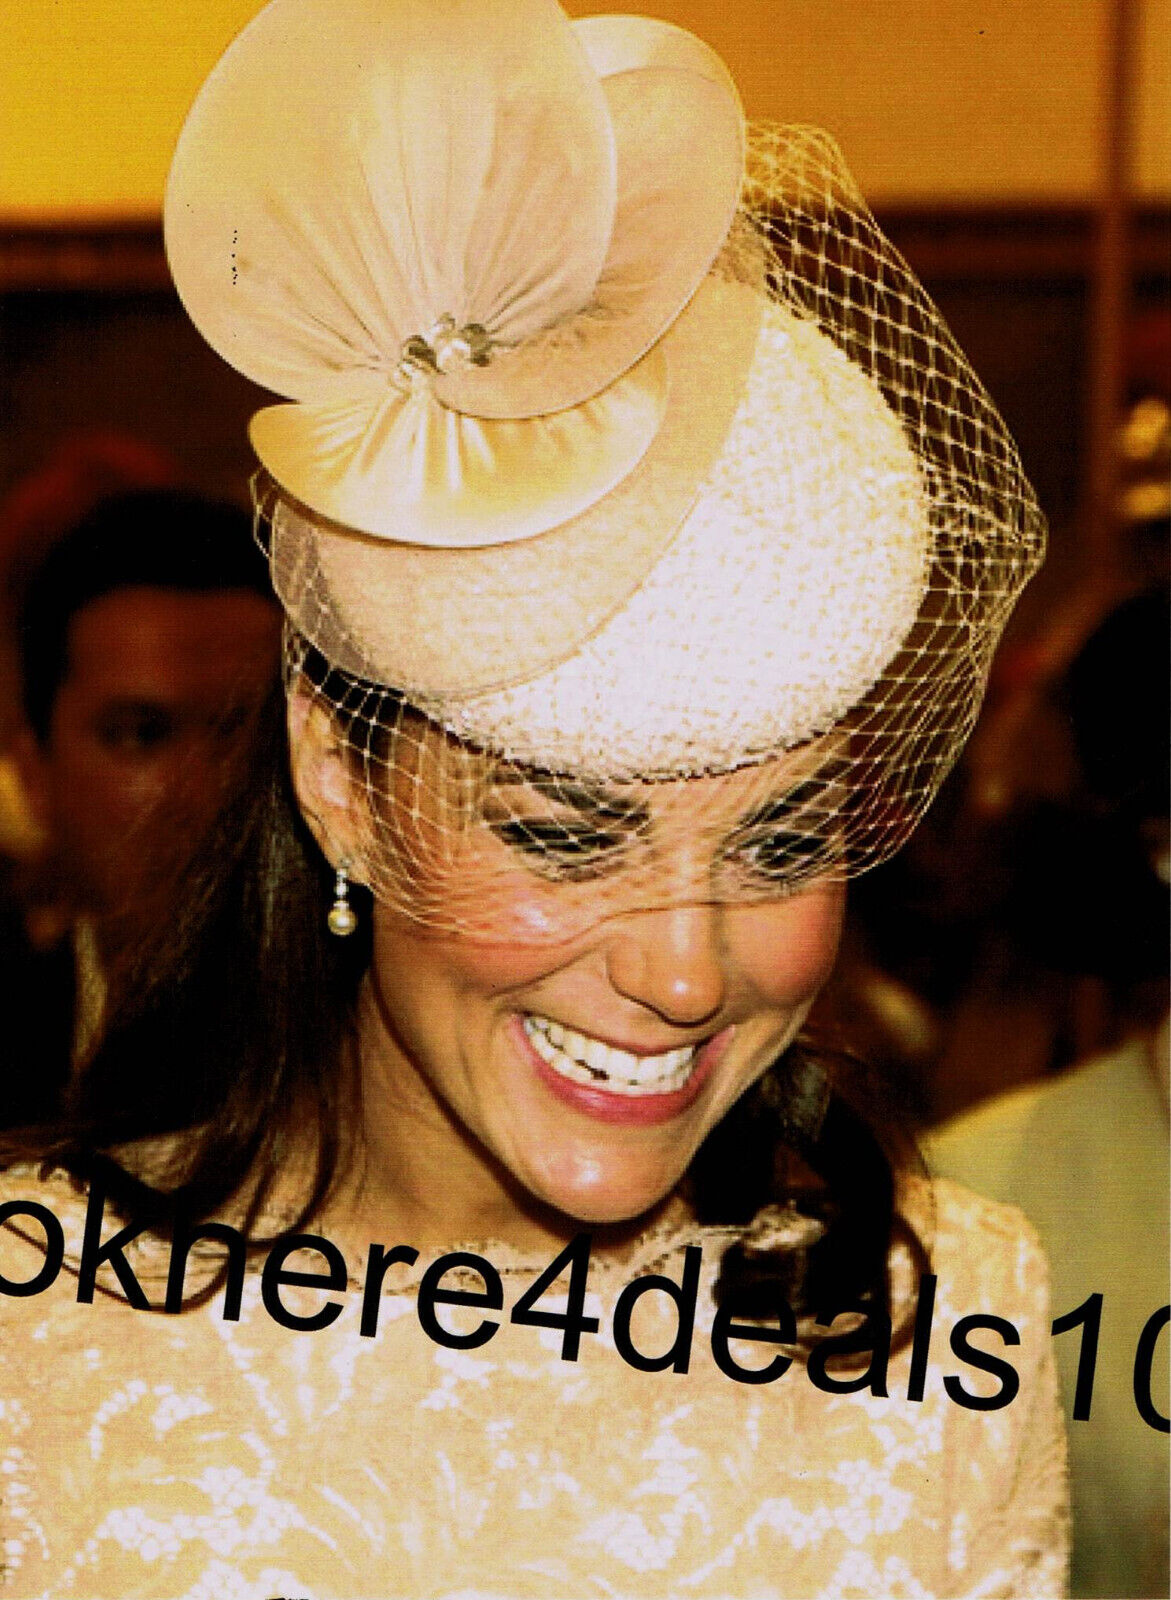 Kate Middleton Photo 5x7 Royal Collectibles Great Britain London England Без бренда